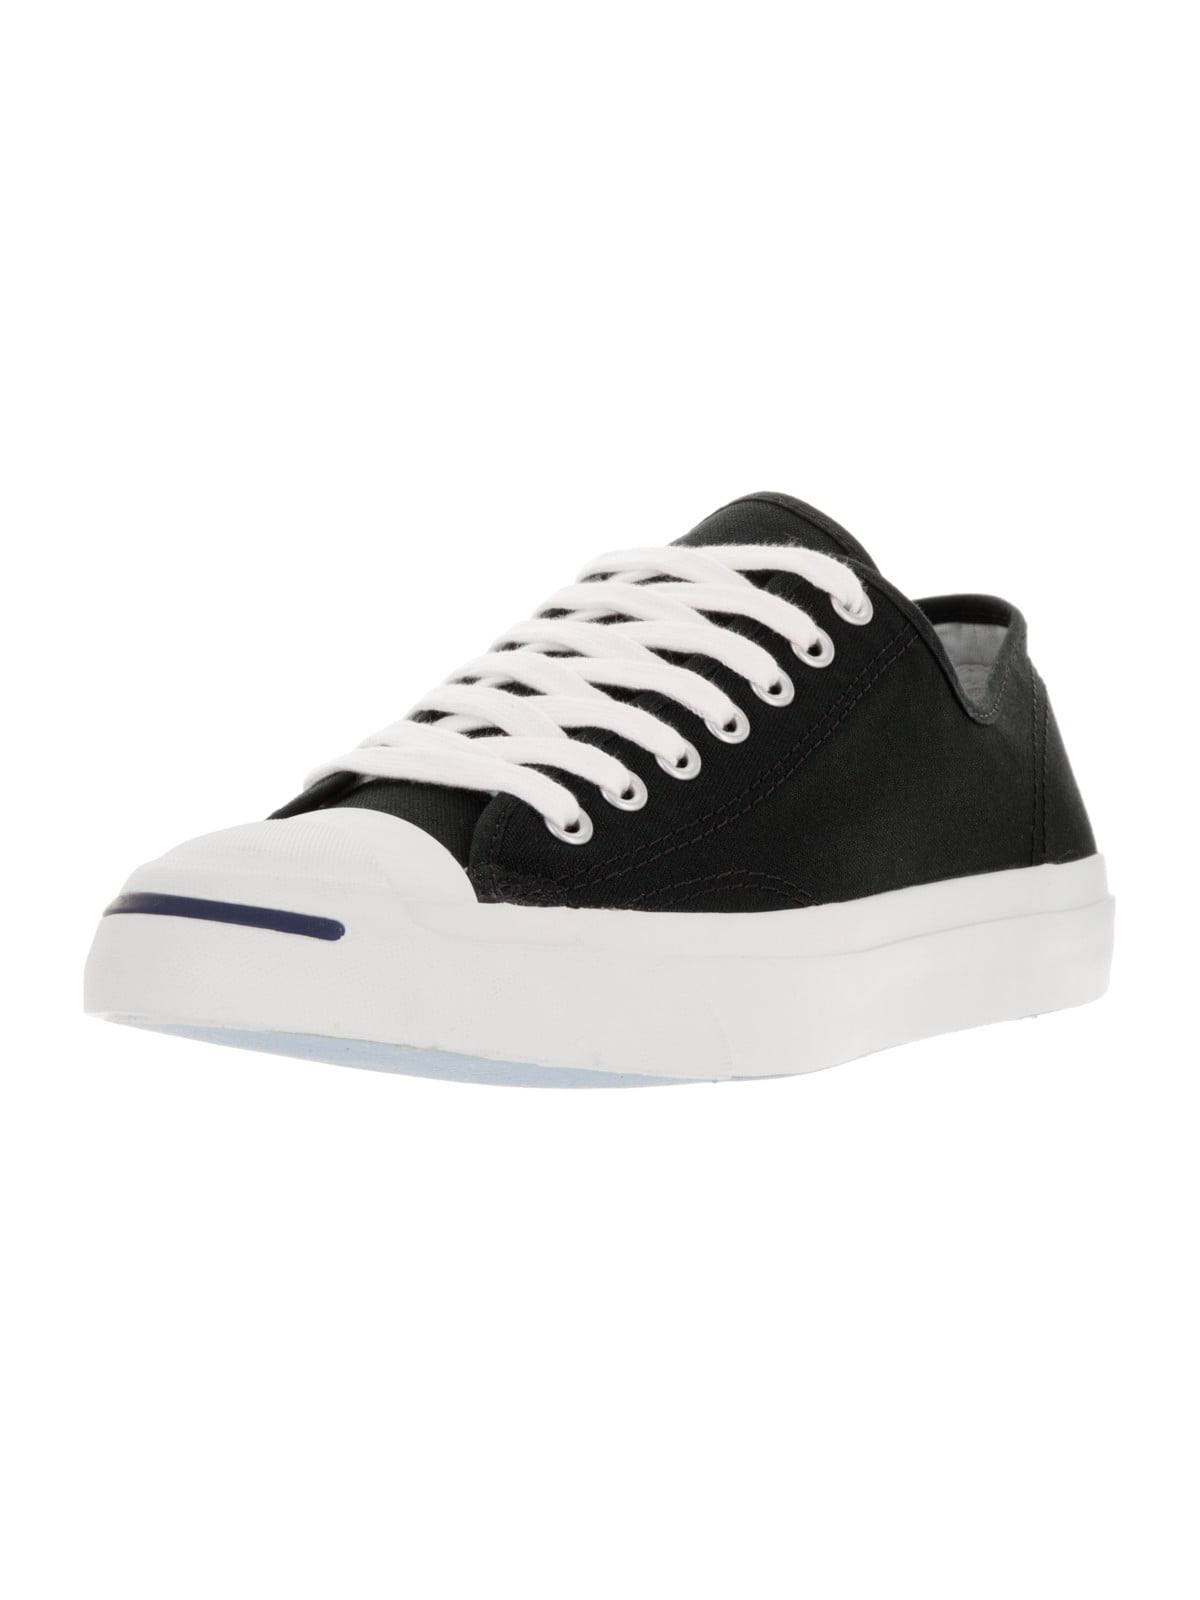 Dignified moth Quilt Converse Unisex Jack Purcell Cp Ox Casual Shoe - Walmart.com